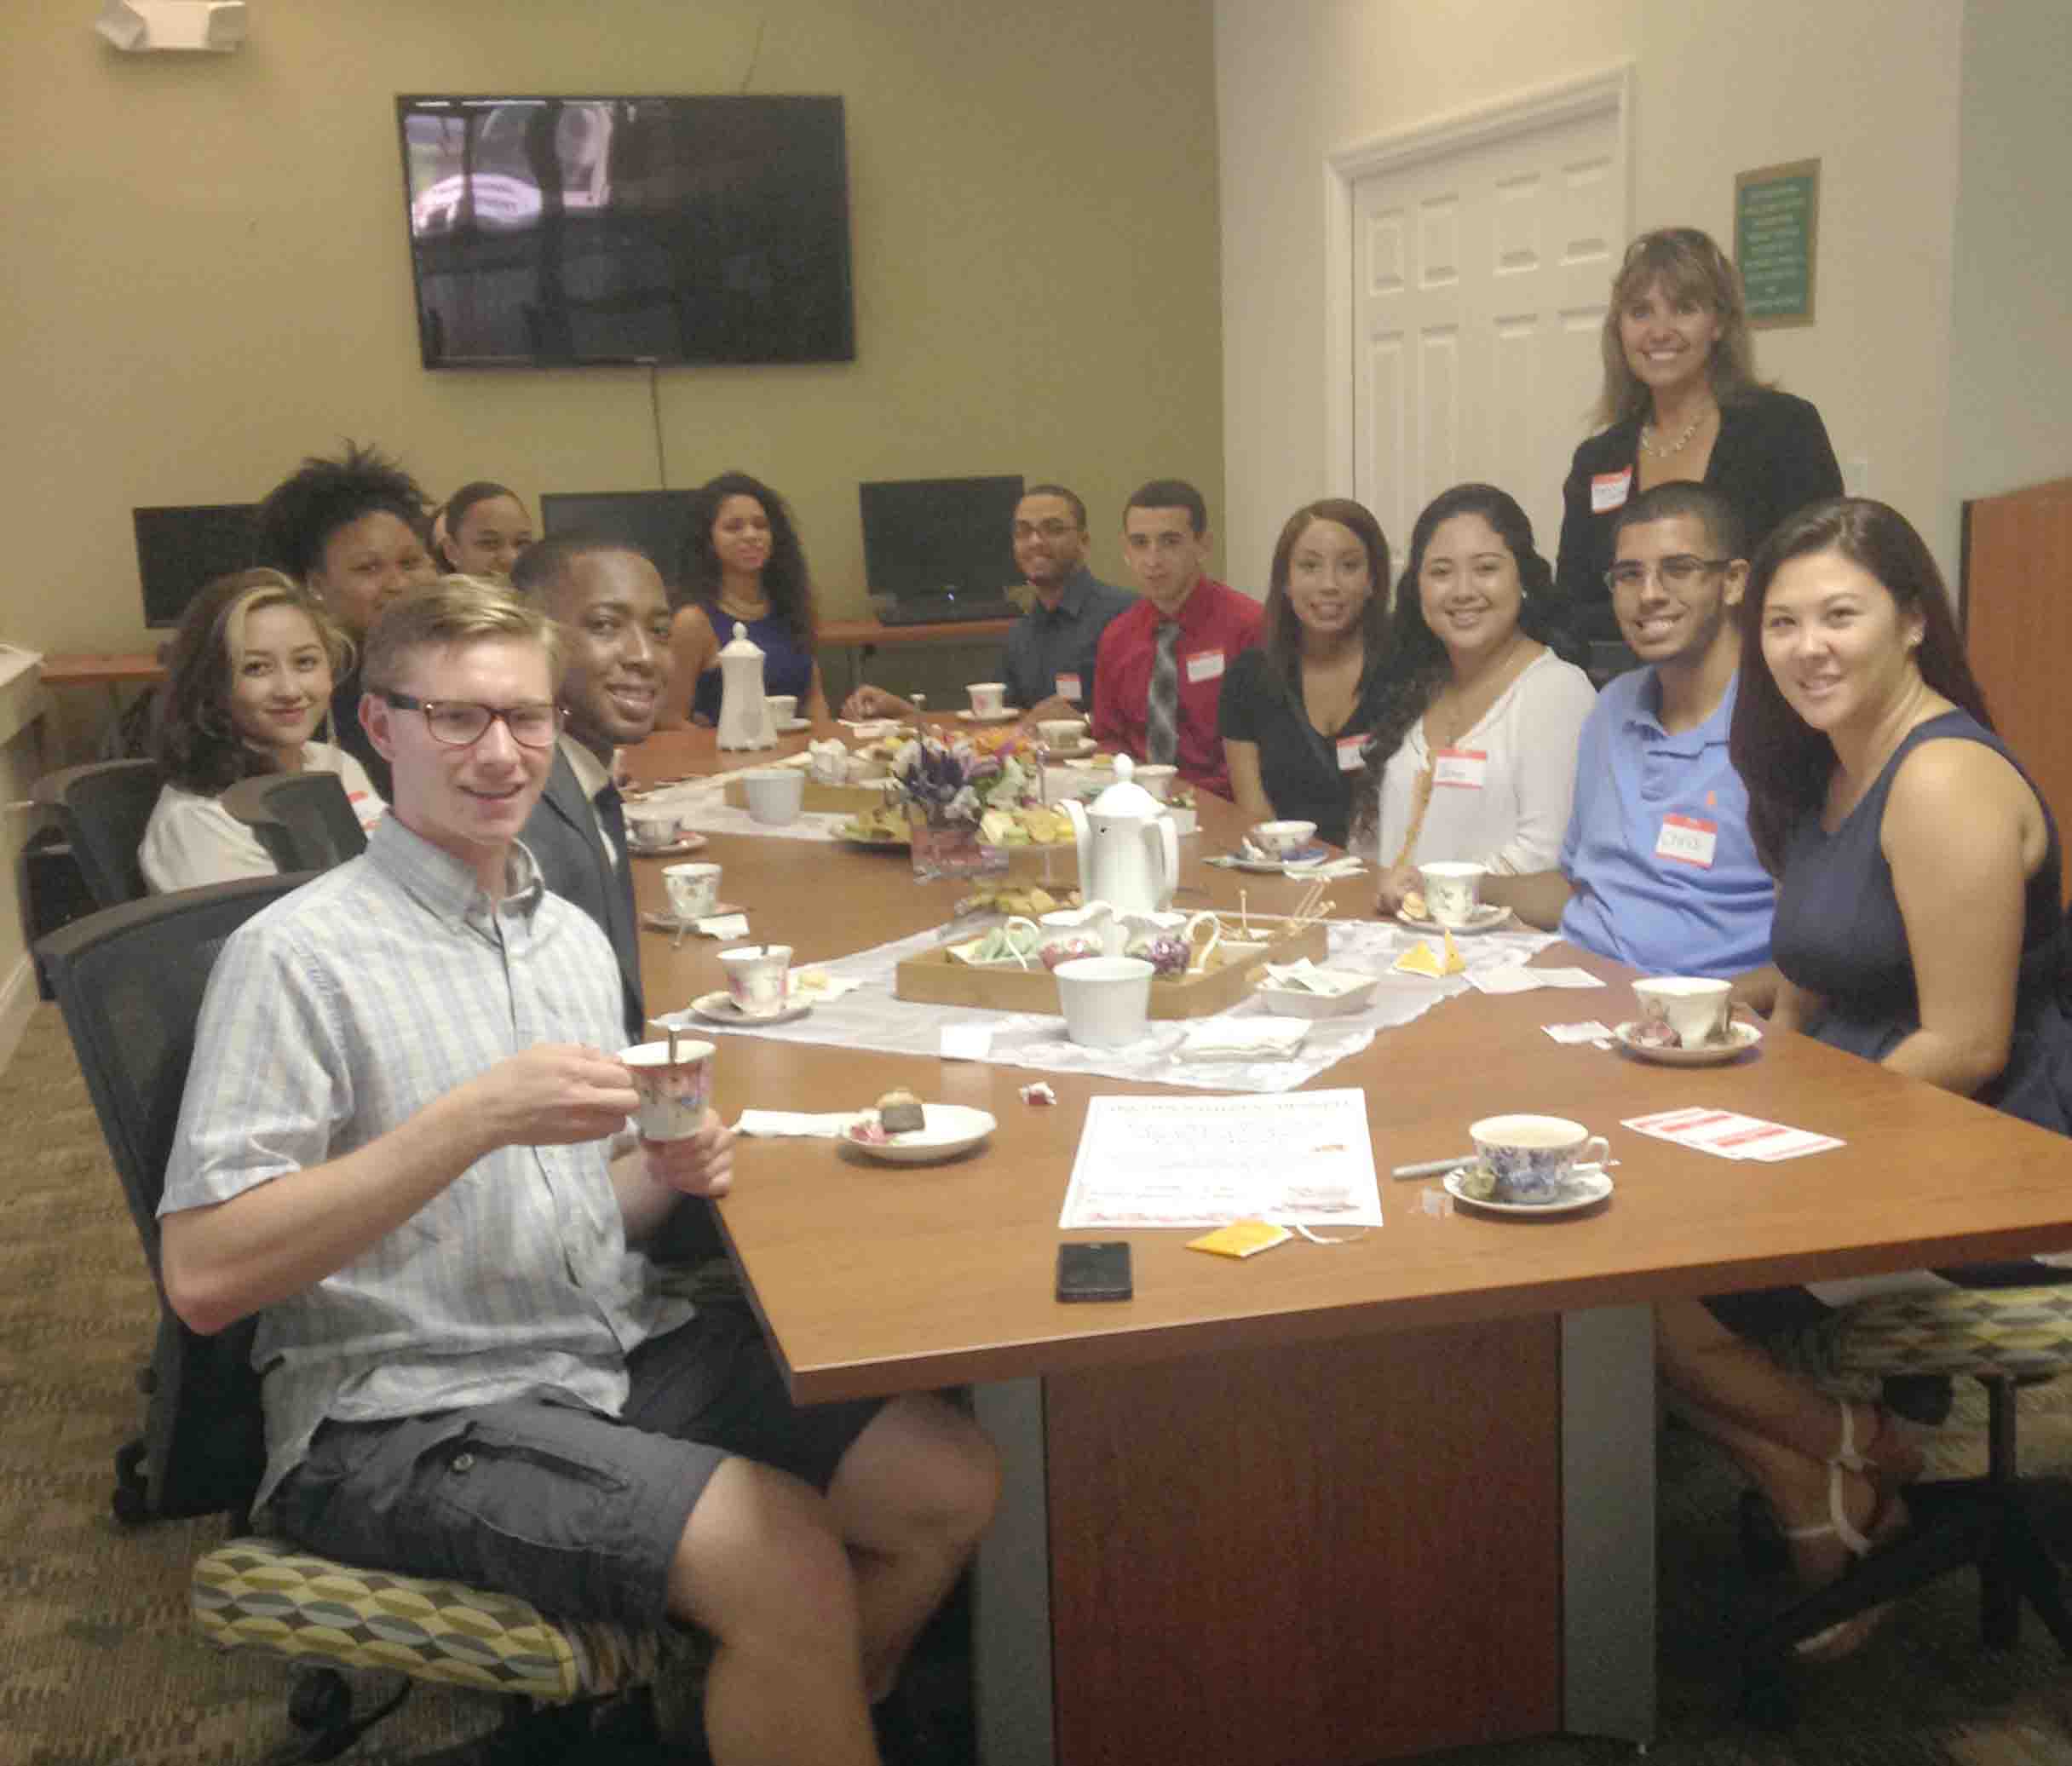 Students Enjoy British “Tea Time” with Academic Dean